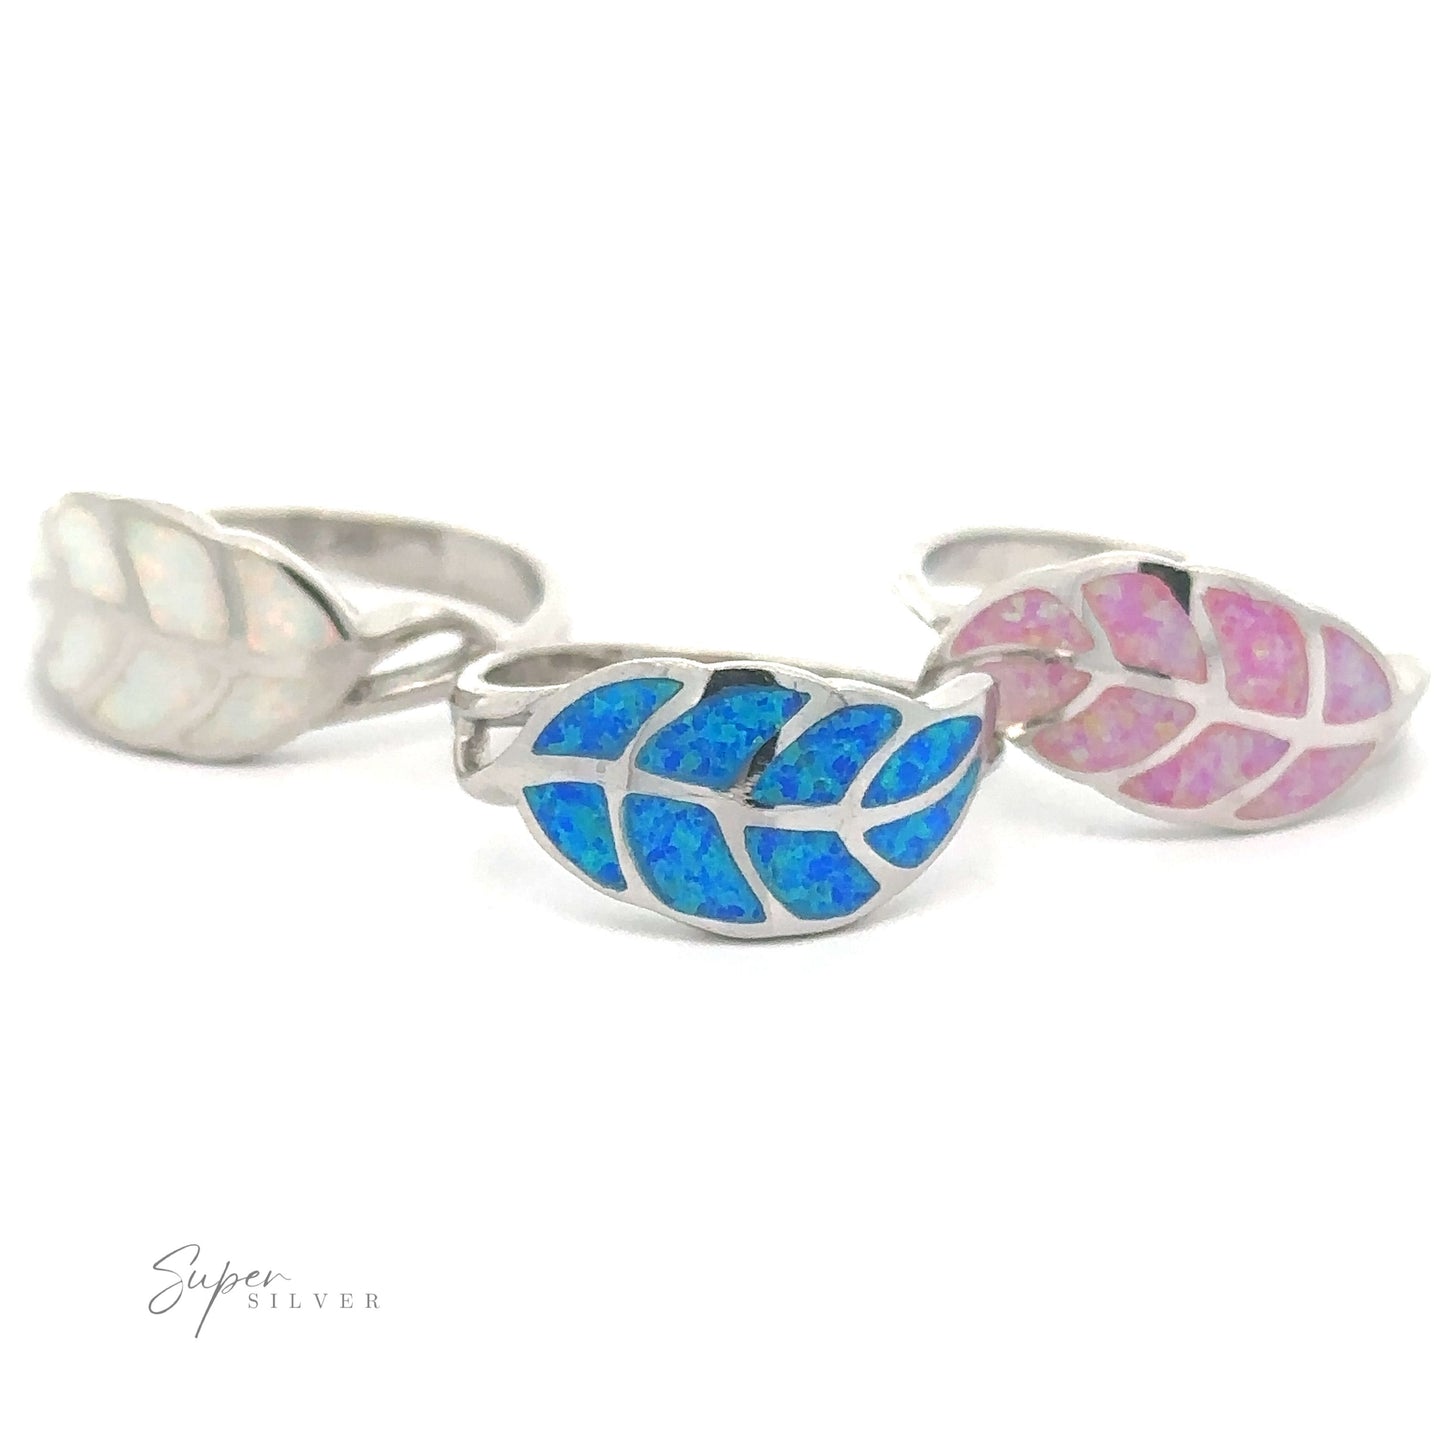 A trio of silver rings with leaf-shaped designs inlaid with blue and pink lab opal materials, exuding an ethereal charm.